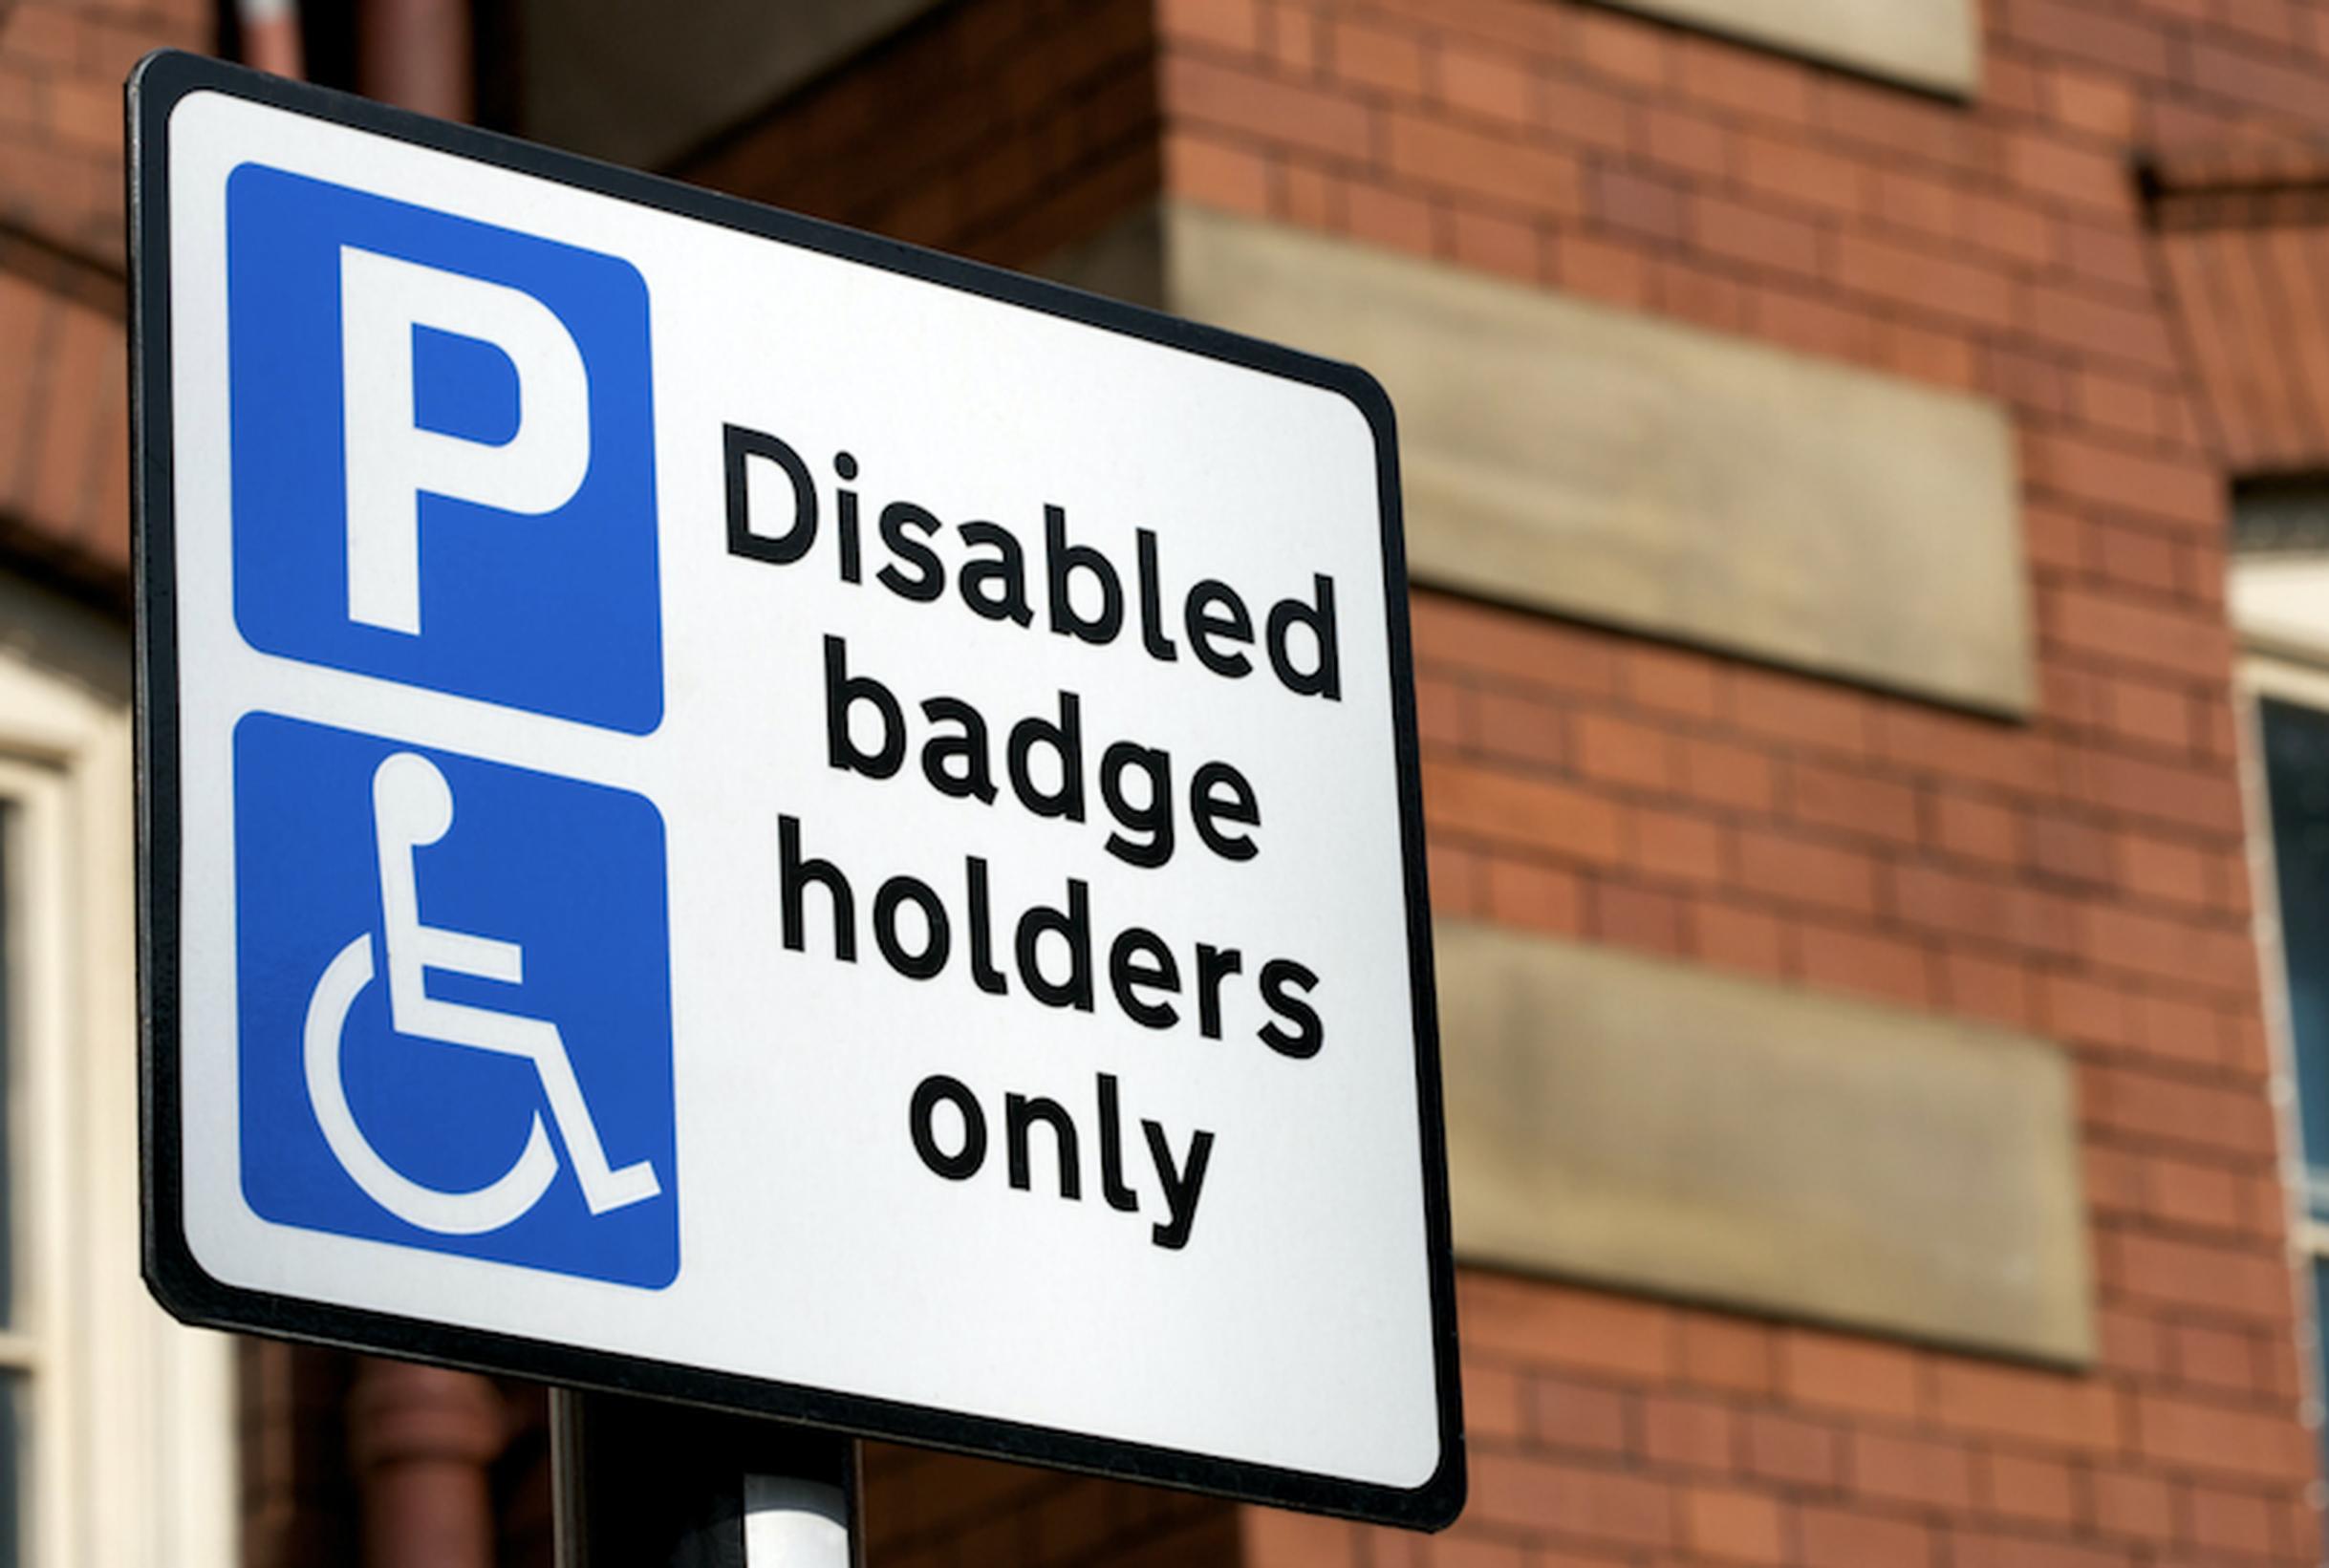 Cllr Linda Perks, cabinet member for finance and resources said: “Blue Badge fraud denies people with disabilities access to parking spaces, which are a lifeline to vital services, including healthcare, in our towns and cities. We hope this prosecution sends a strong message that misusing a Blue Badge is a criminal offence.”